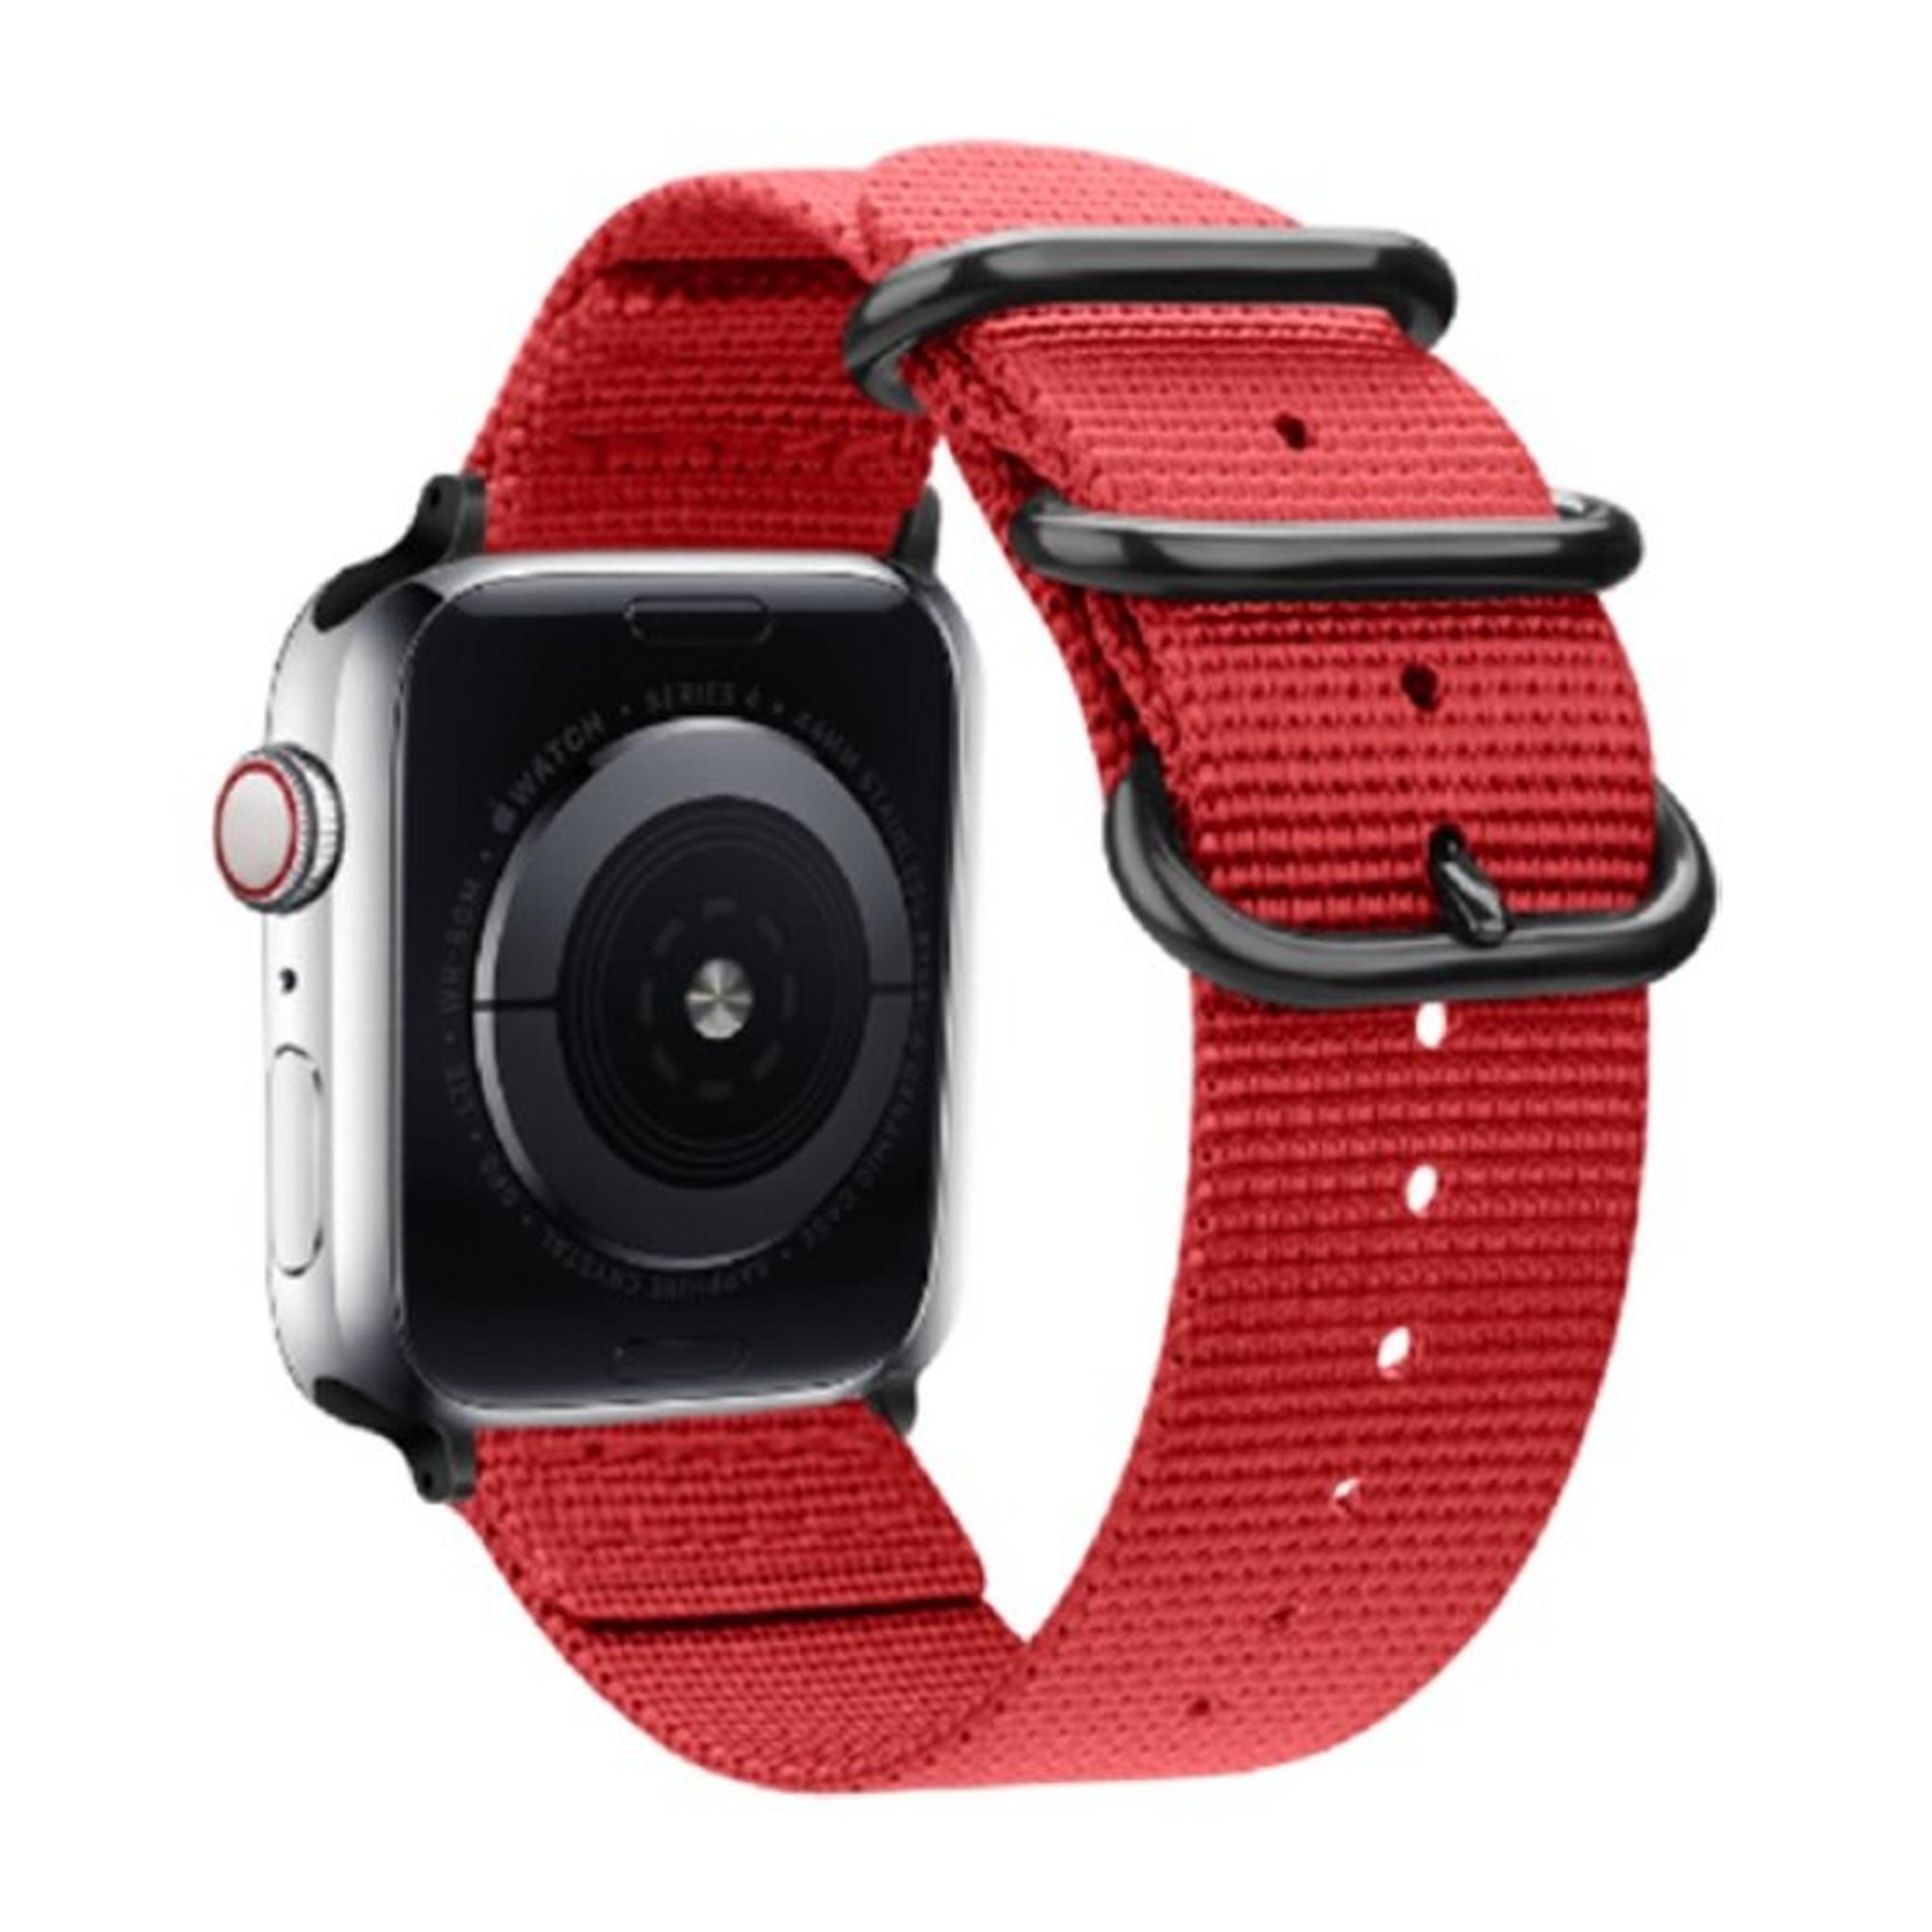 EQ Apple Watch Band Size 38/40MM (OCT 1031) - Red